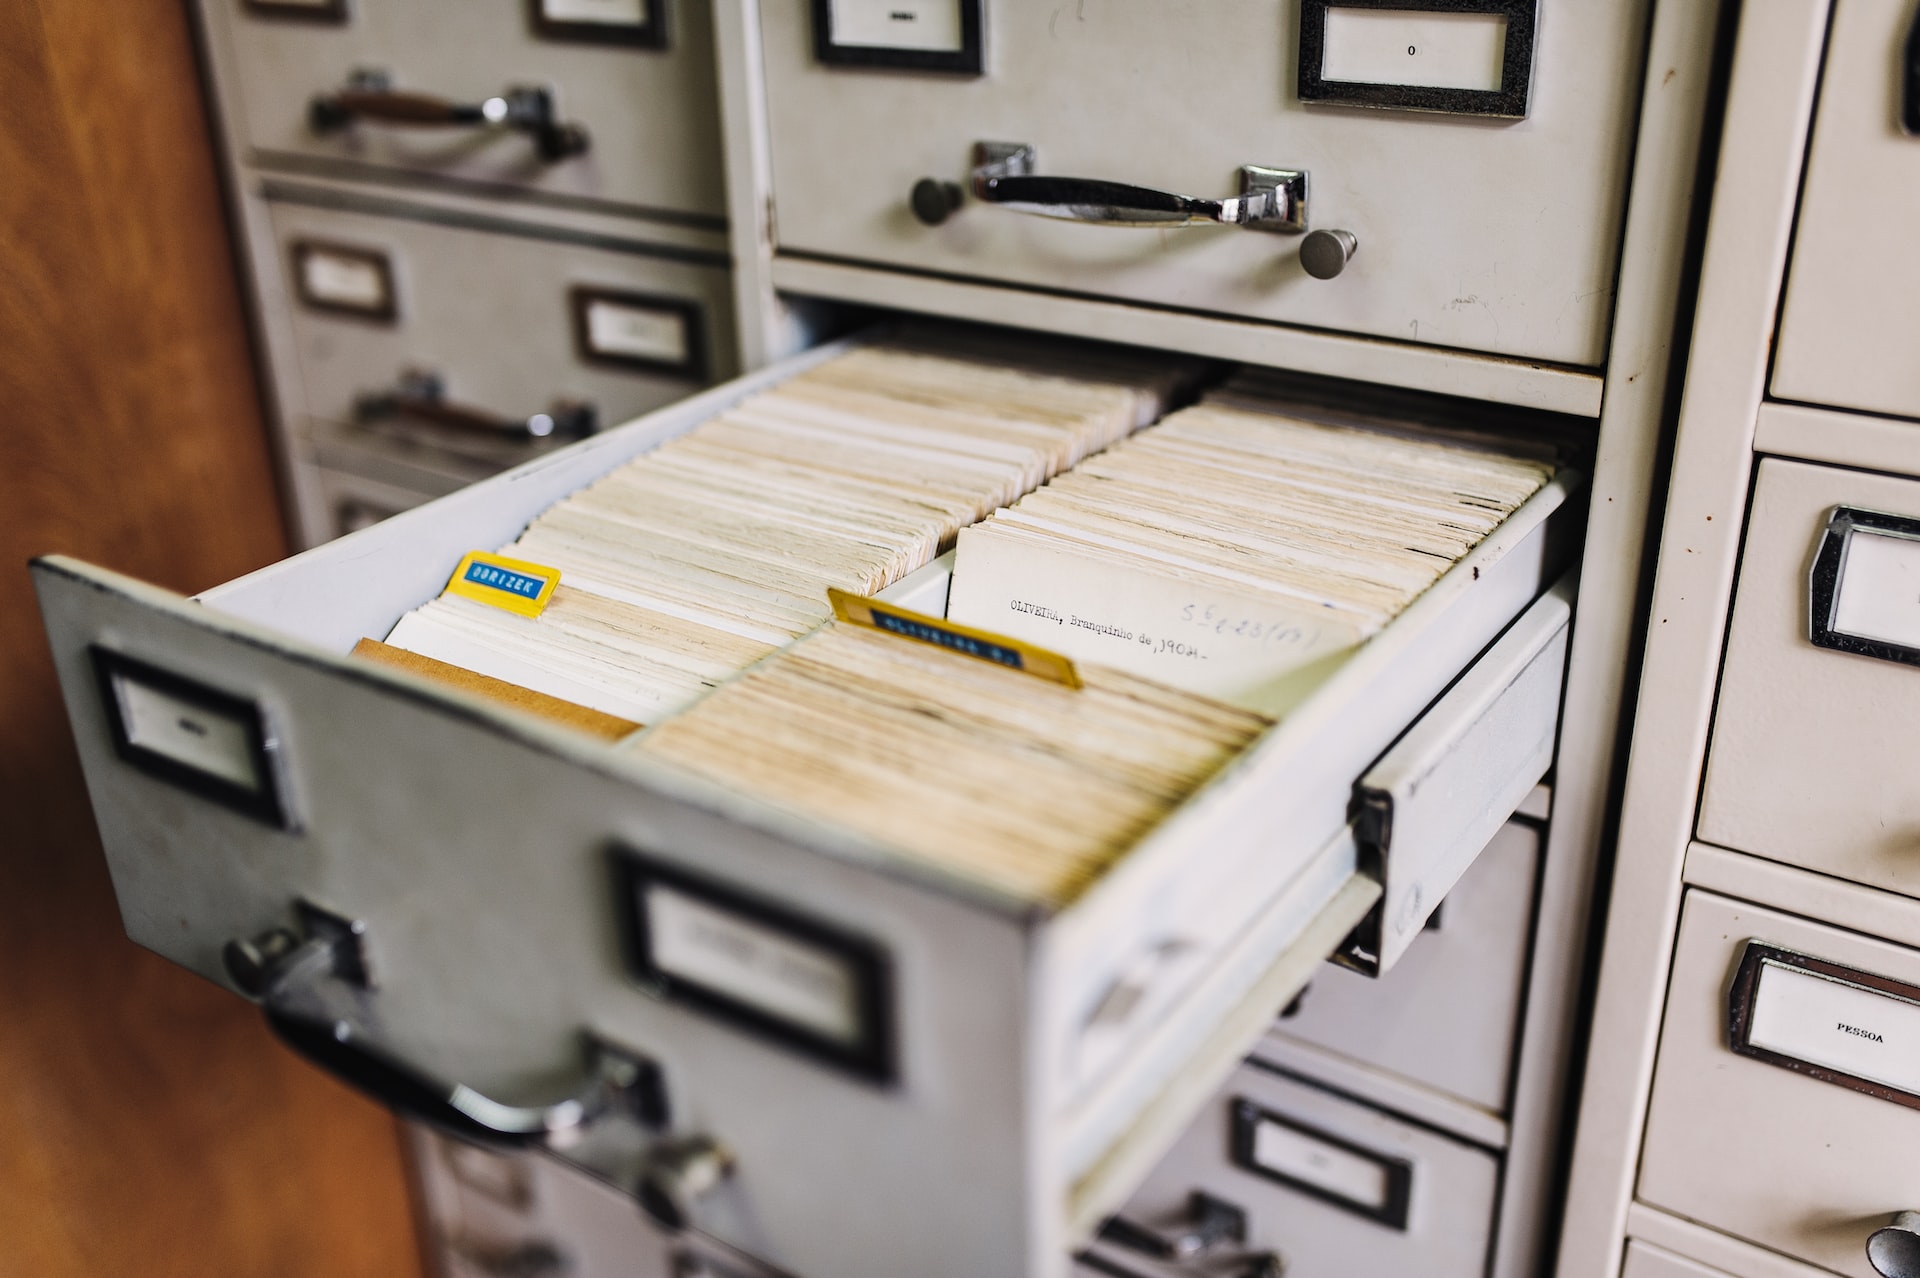 Photograph of a filing cabinet filled with library index cards.